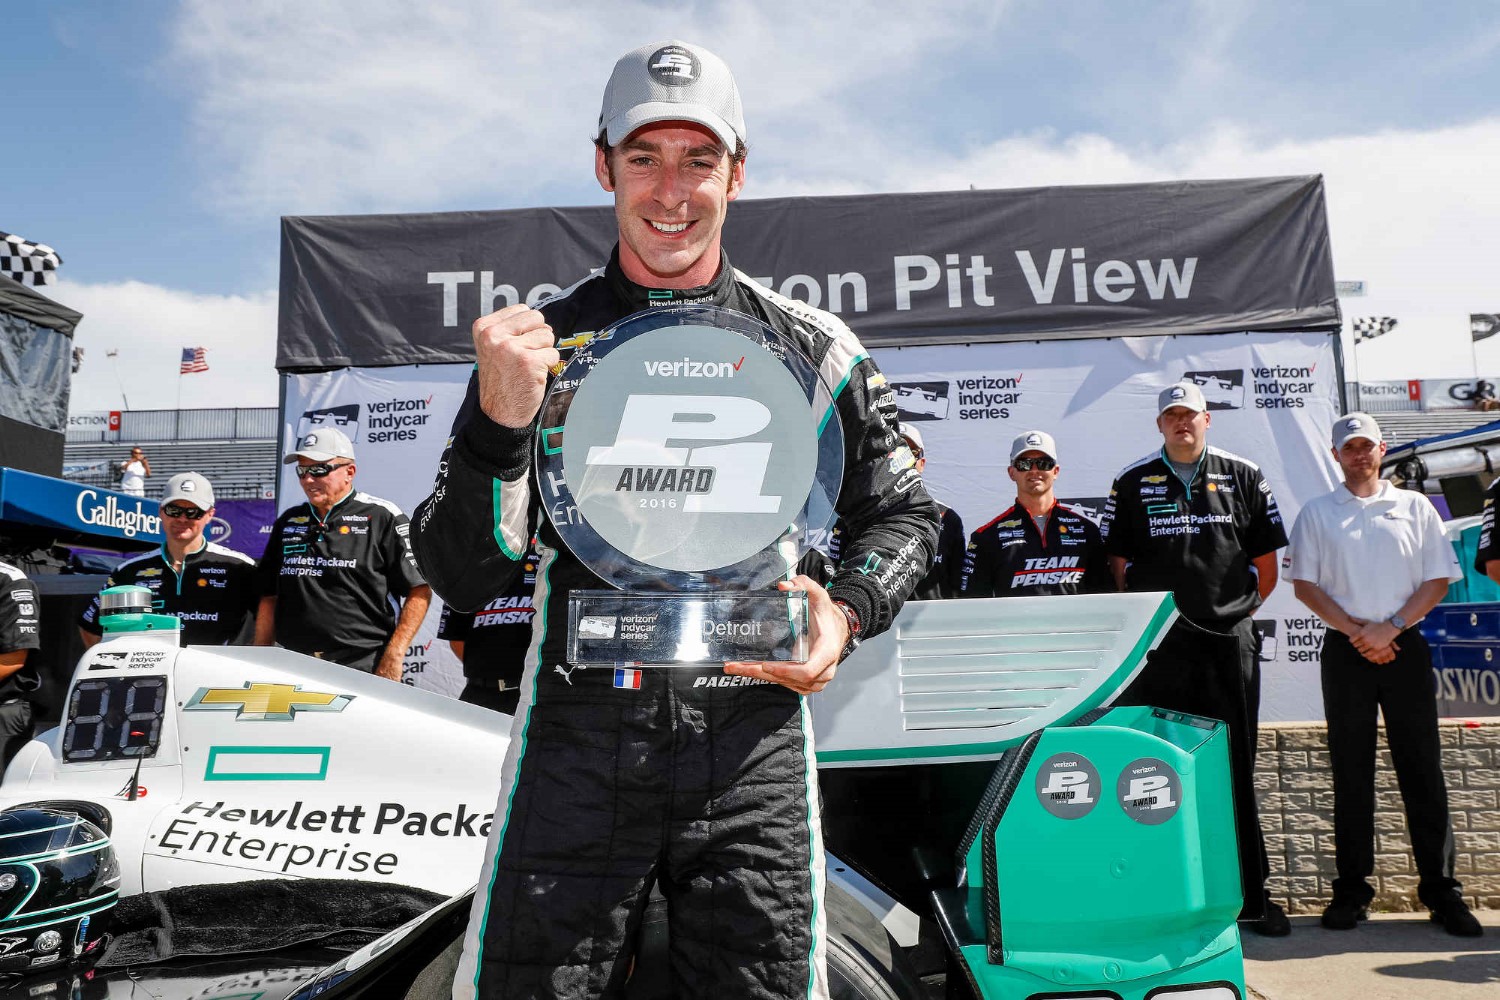 Pagenaud won pole for today's Race 1 yesterday